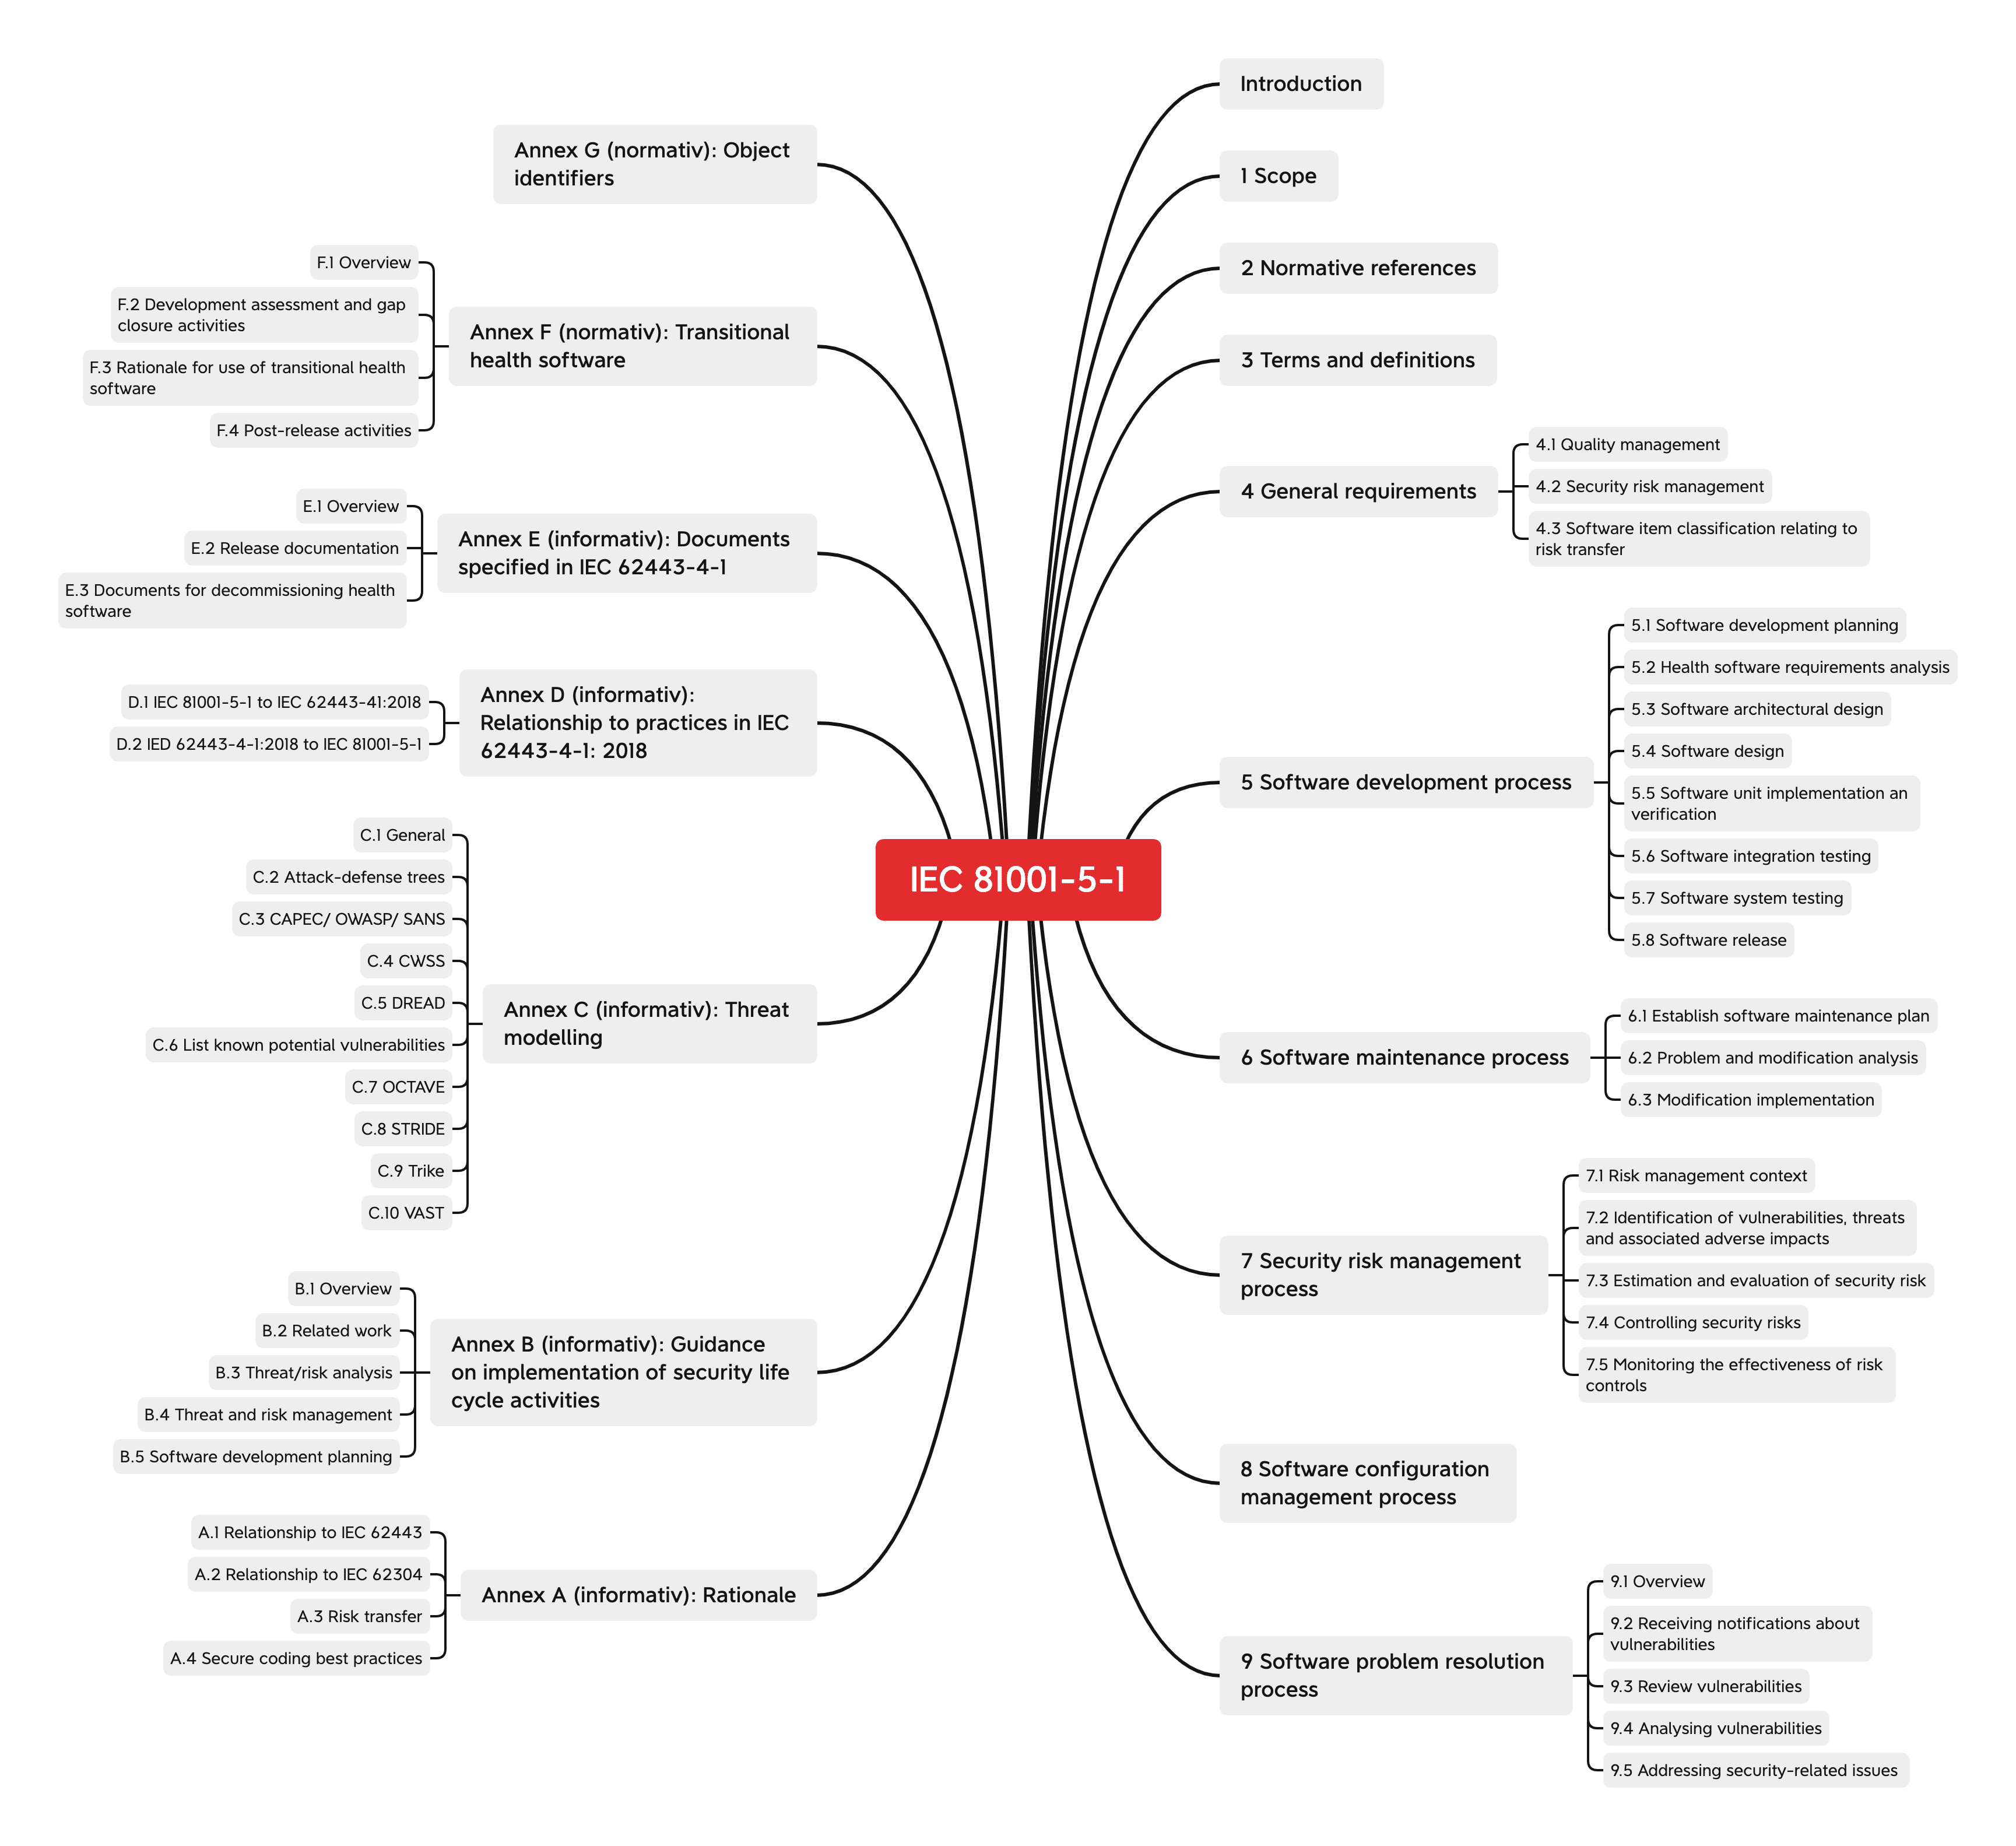 Mind map of the chapter structure of IEC 81001-5-1